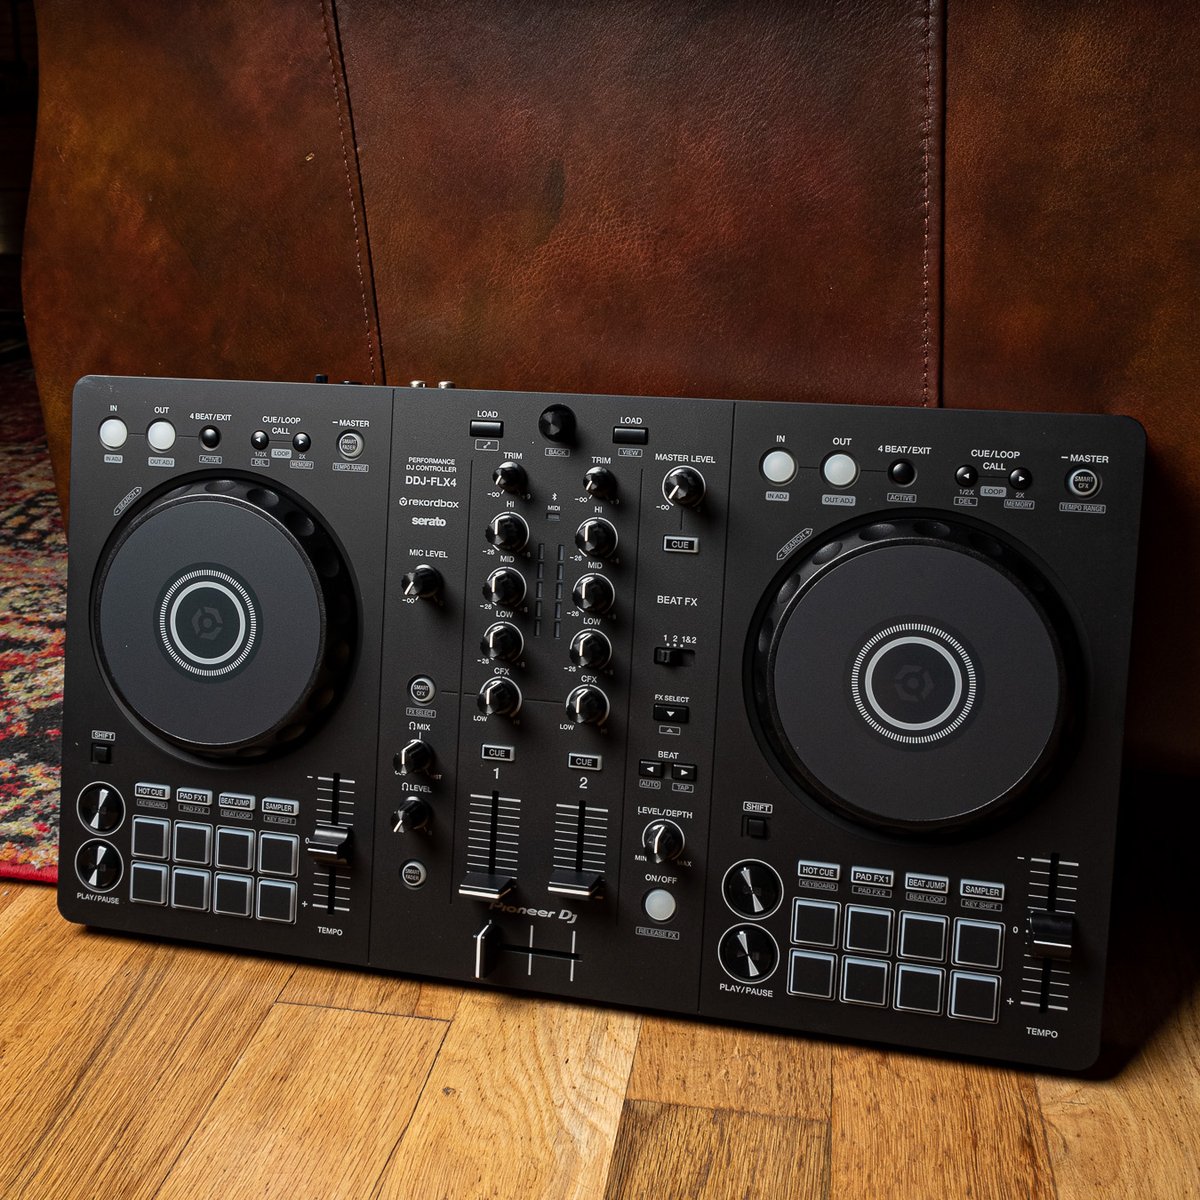 If spinning records is your jam, make the Pioneer DDJ-FLX4 DJ 2-channel controller the centerpiece of your setup—using the DJ software rekordbox, Serato DJ Lite, and djay free when you connect a PC/Mac! Gear up for a summer at CME! bit.ly/3Pv5Xp1 #Pioneer